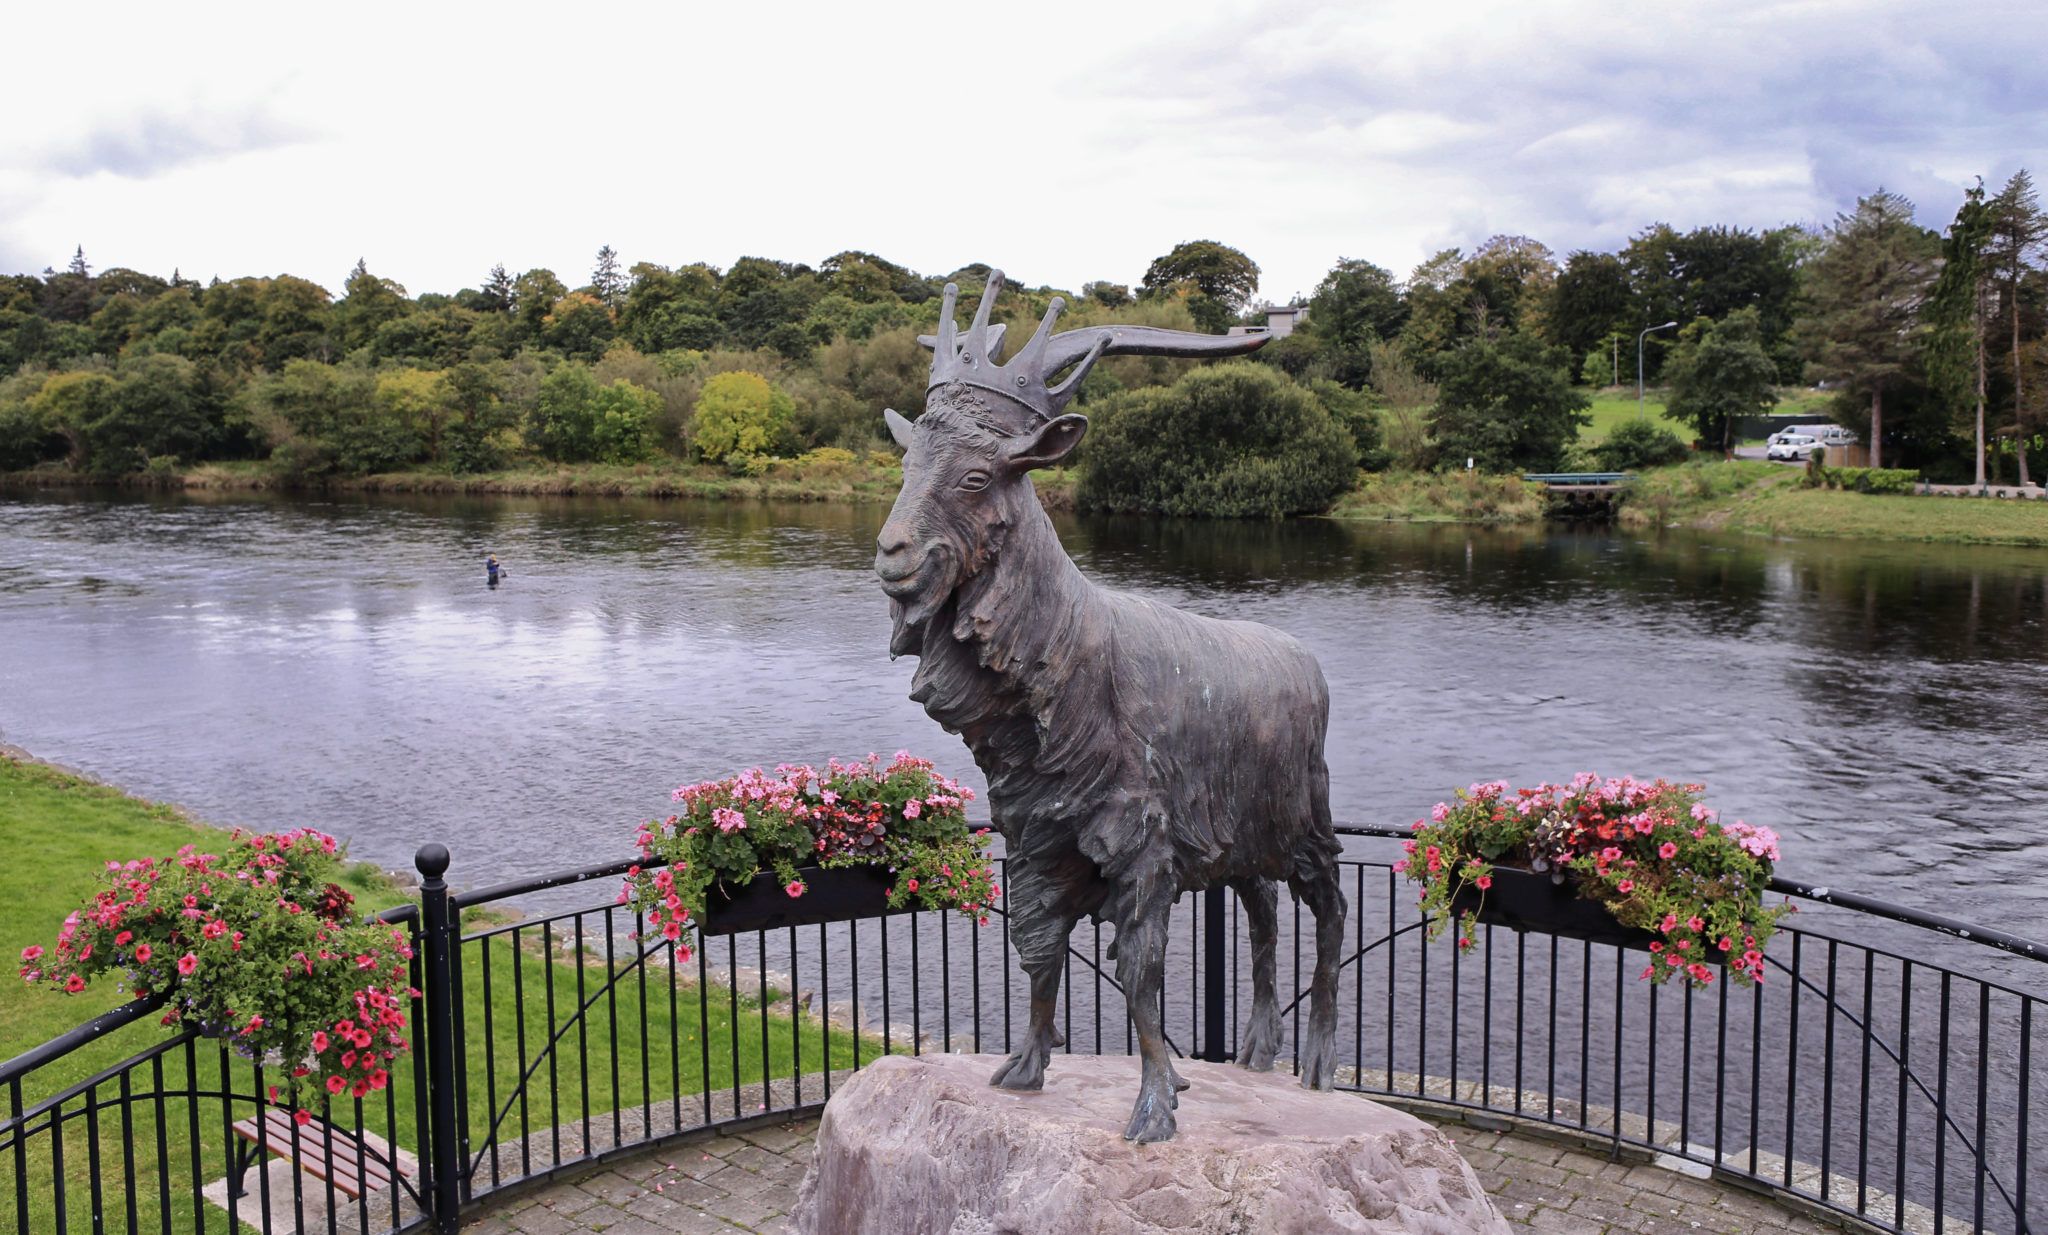 King Puck goat has been released from cage at Puck Fair